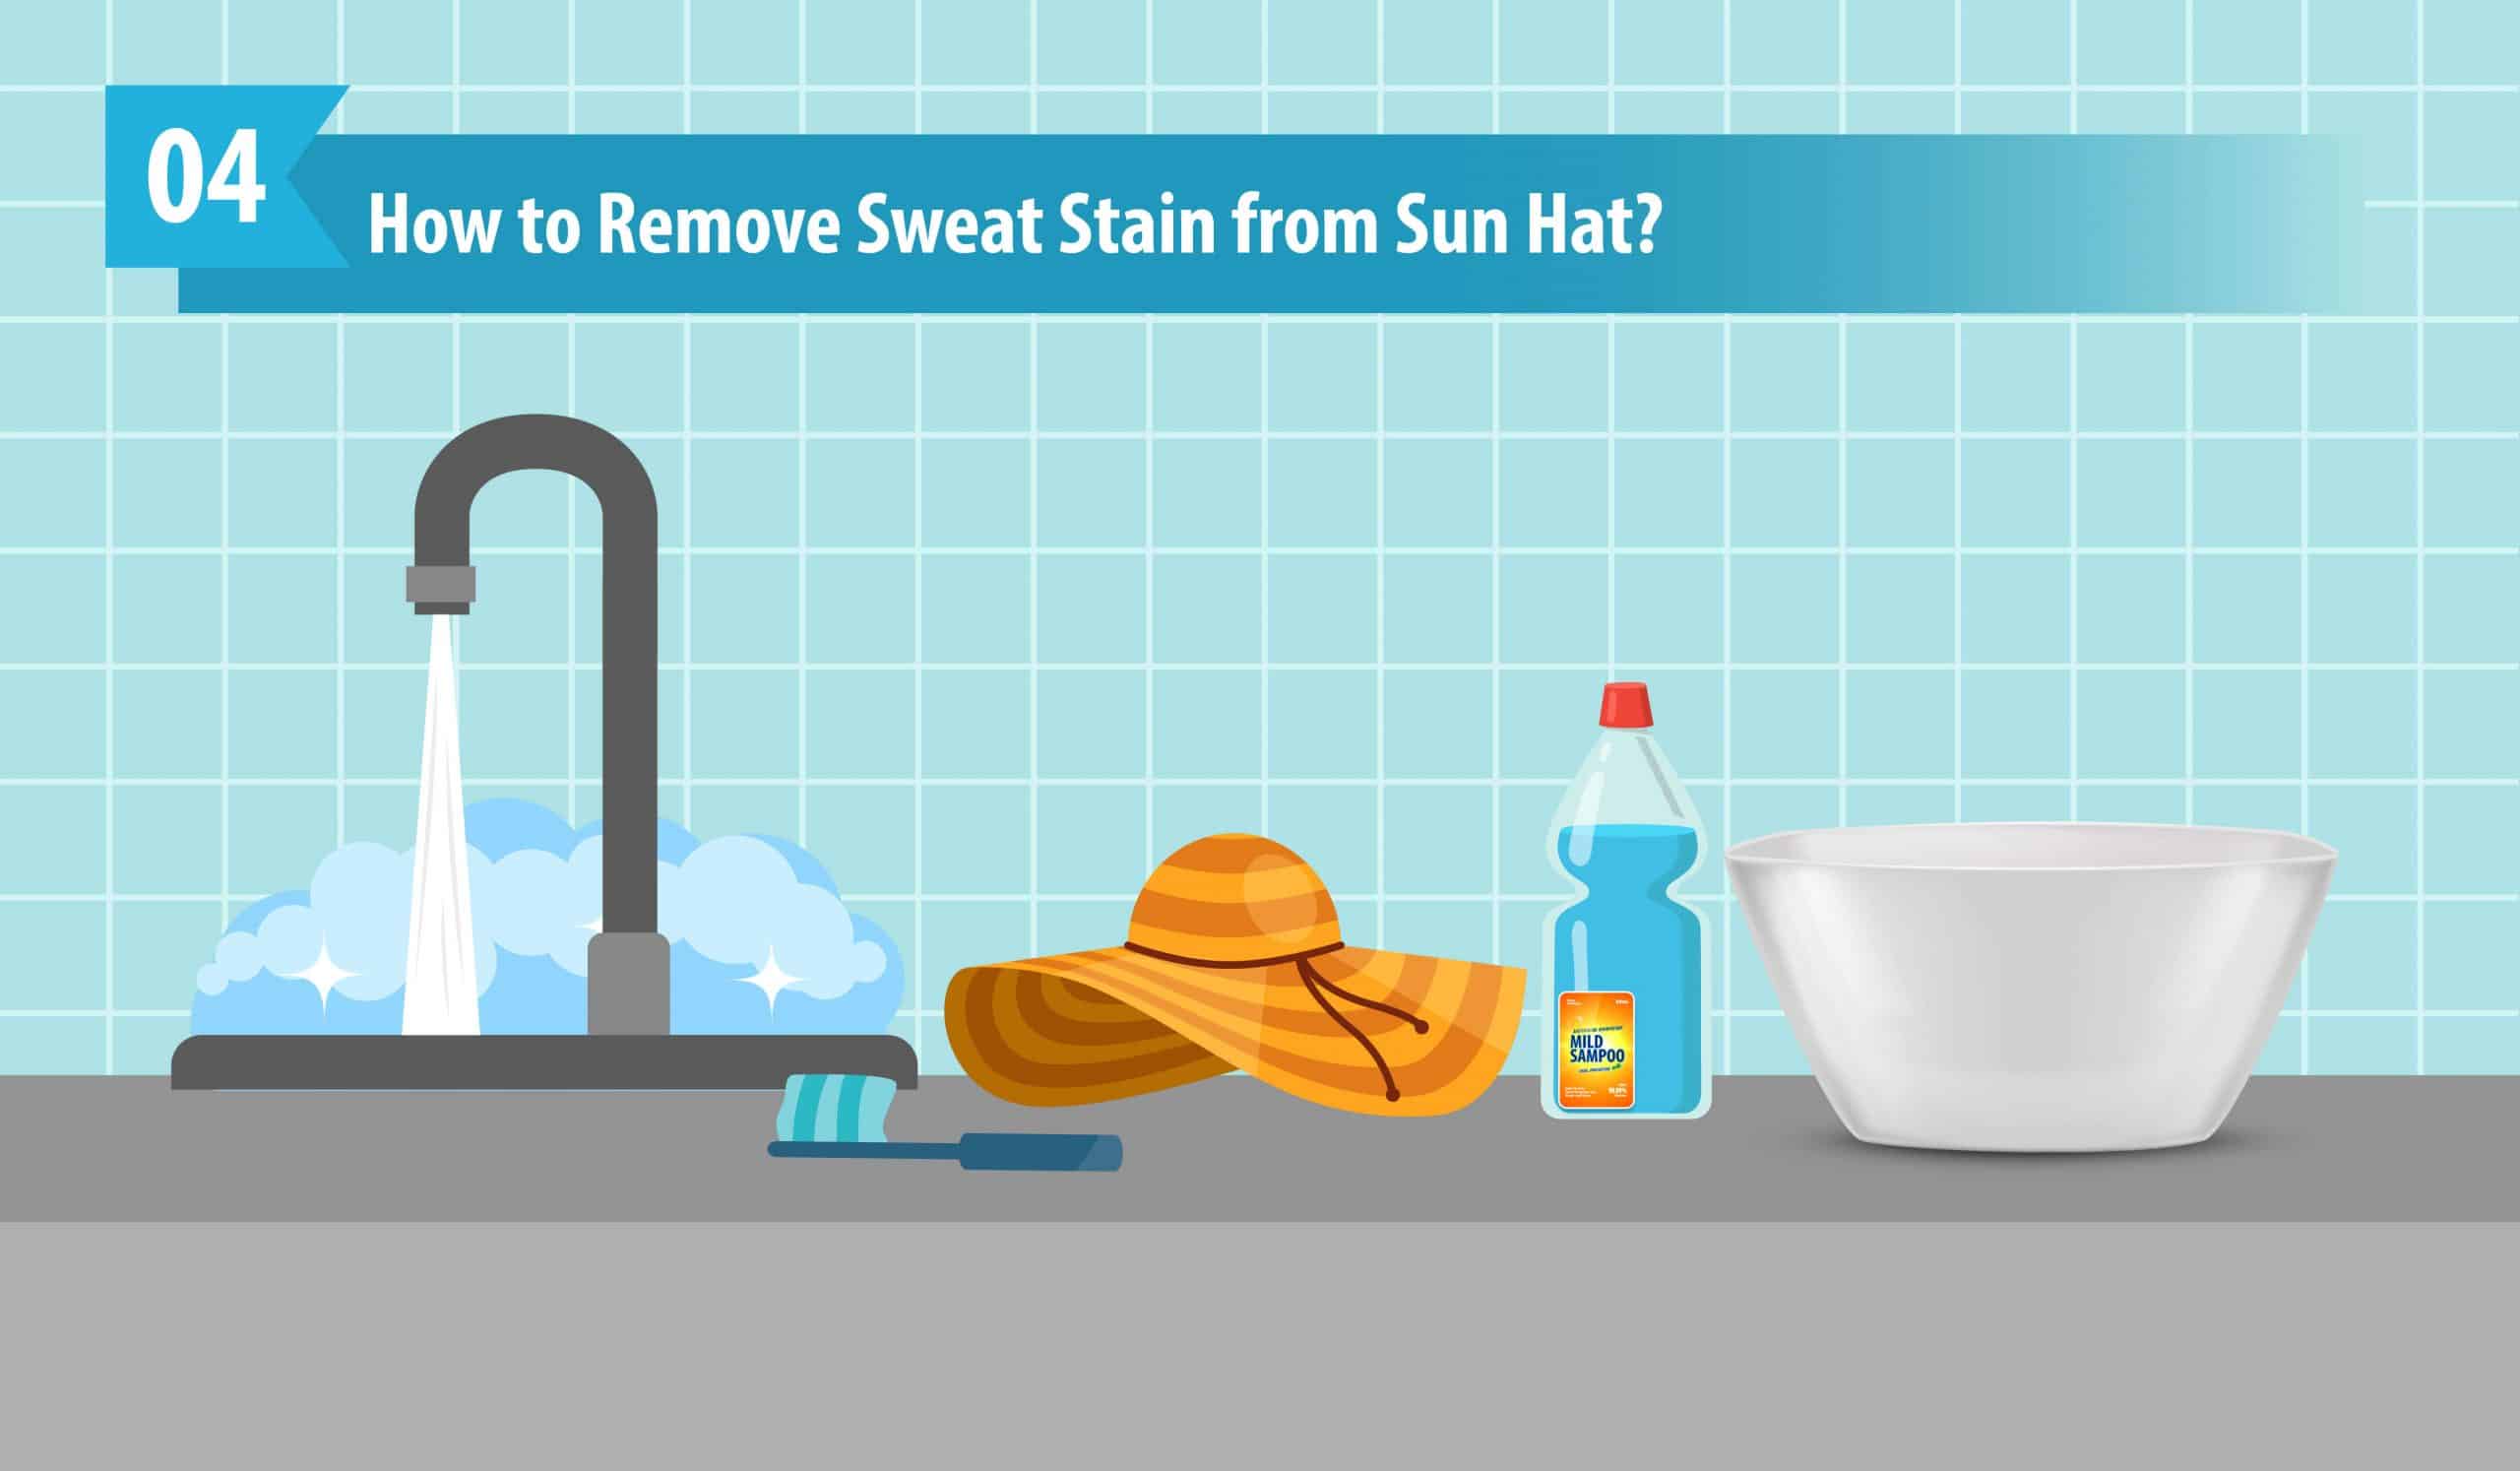 How to Remove Sweat Stain from Sun Hat